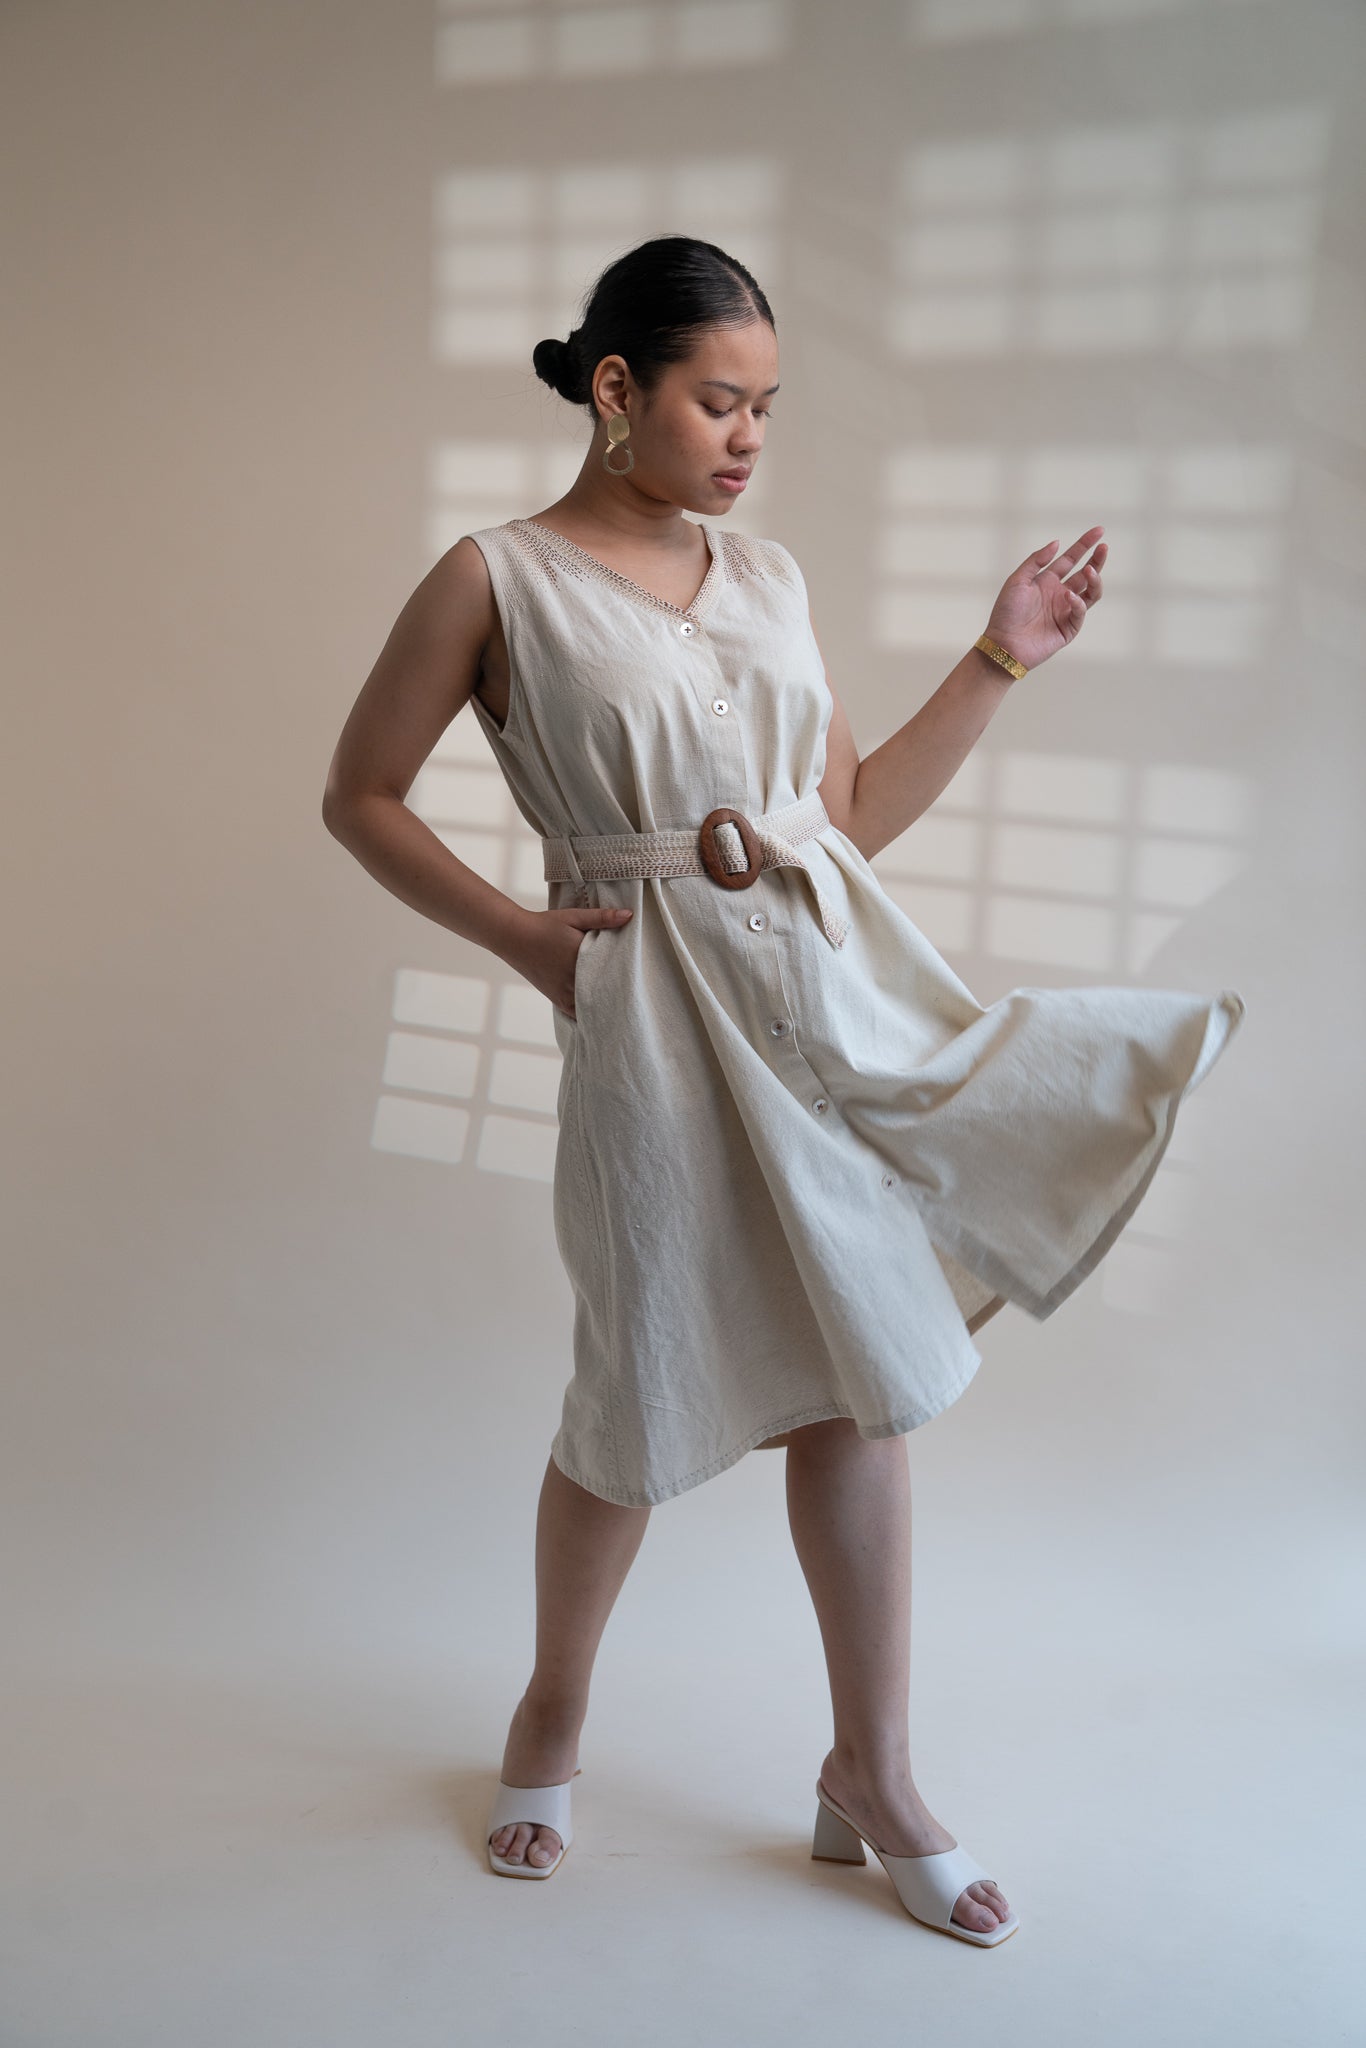 Dawning Trench Dress at Kamakhyaa by Lafaani. This item is Beige, Casual Wear, Denim, Embroidered, Hand Woven Cotton, Kora, Midi Dresses, Natural, Regular Fit, Sleeveless Dresses, Womenswear